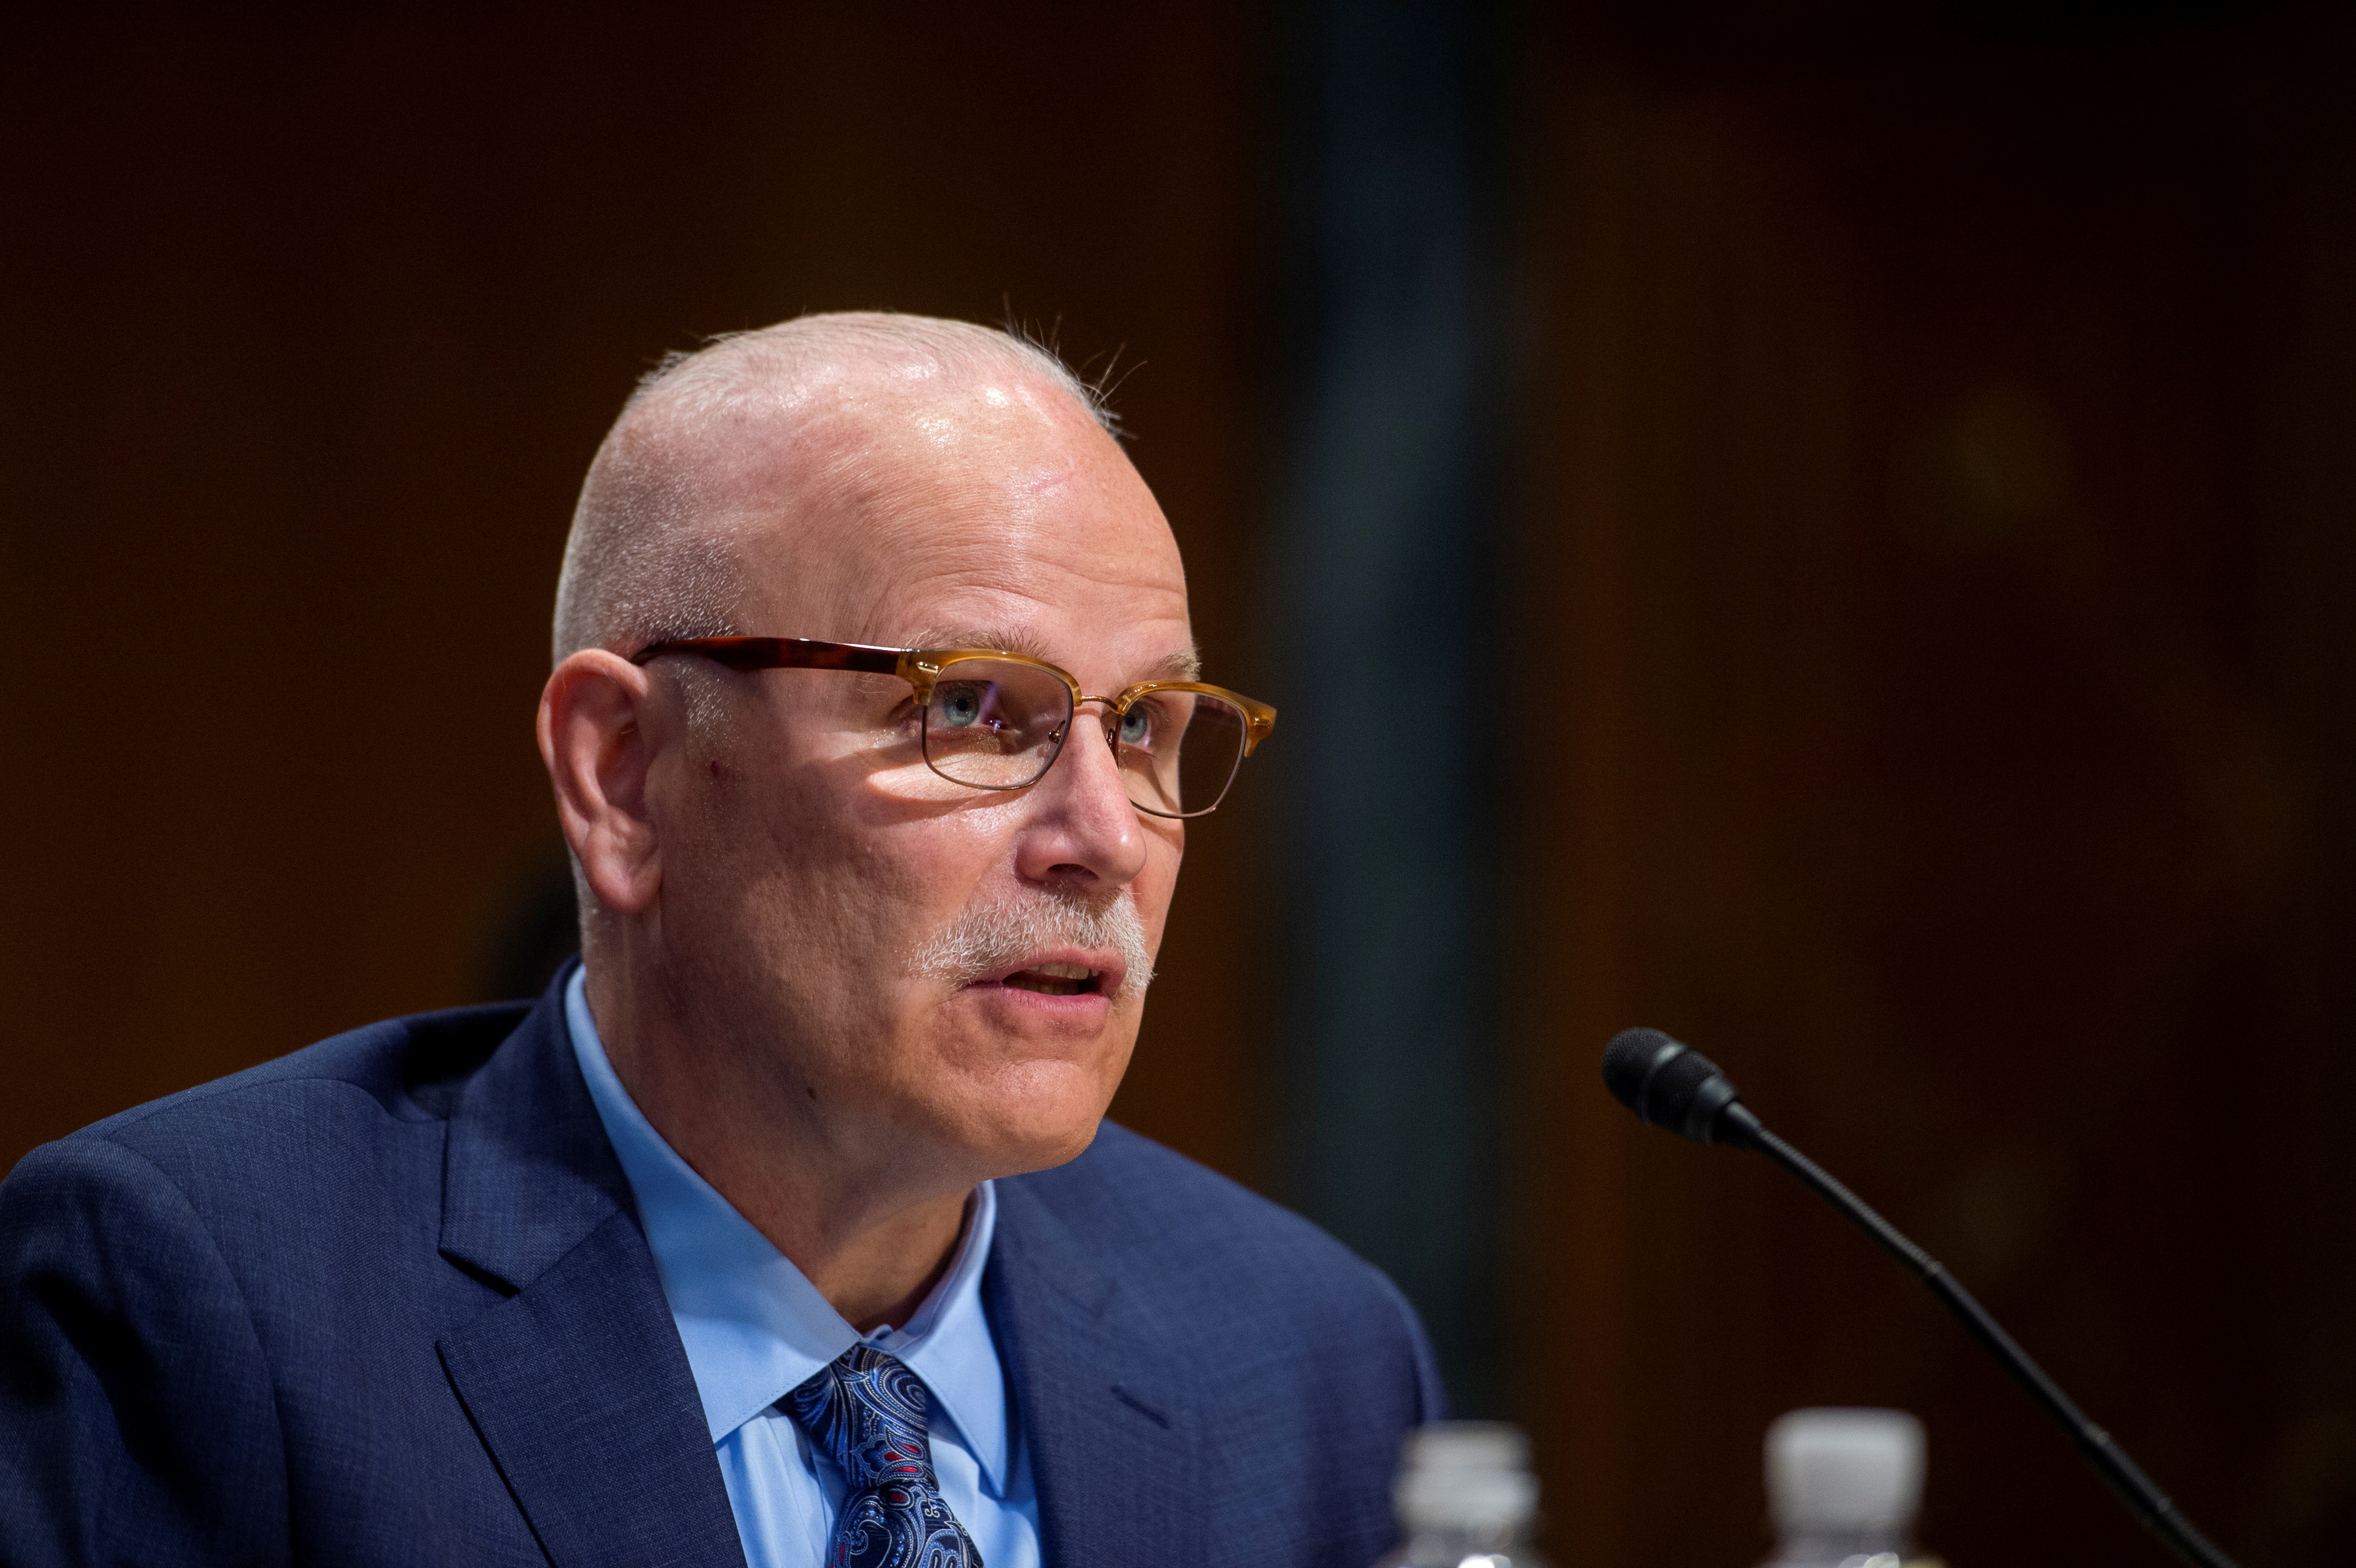 Senate Finance Committee hearing on the nomination of Chris Magnus to be the next U.S. Customs and Border Protection commissioner